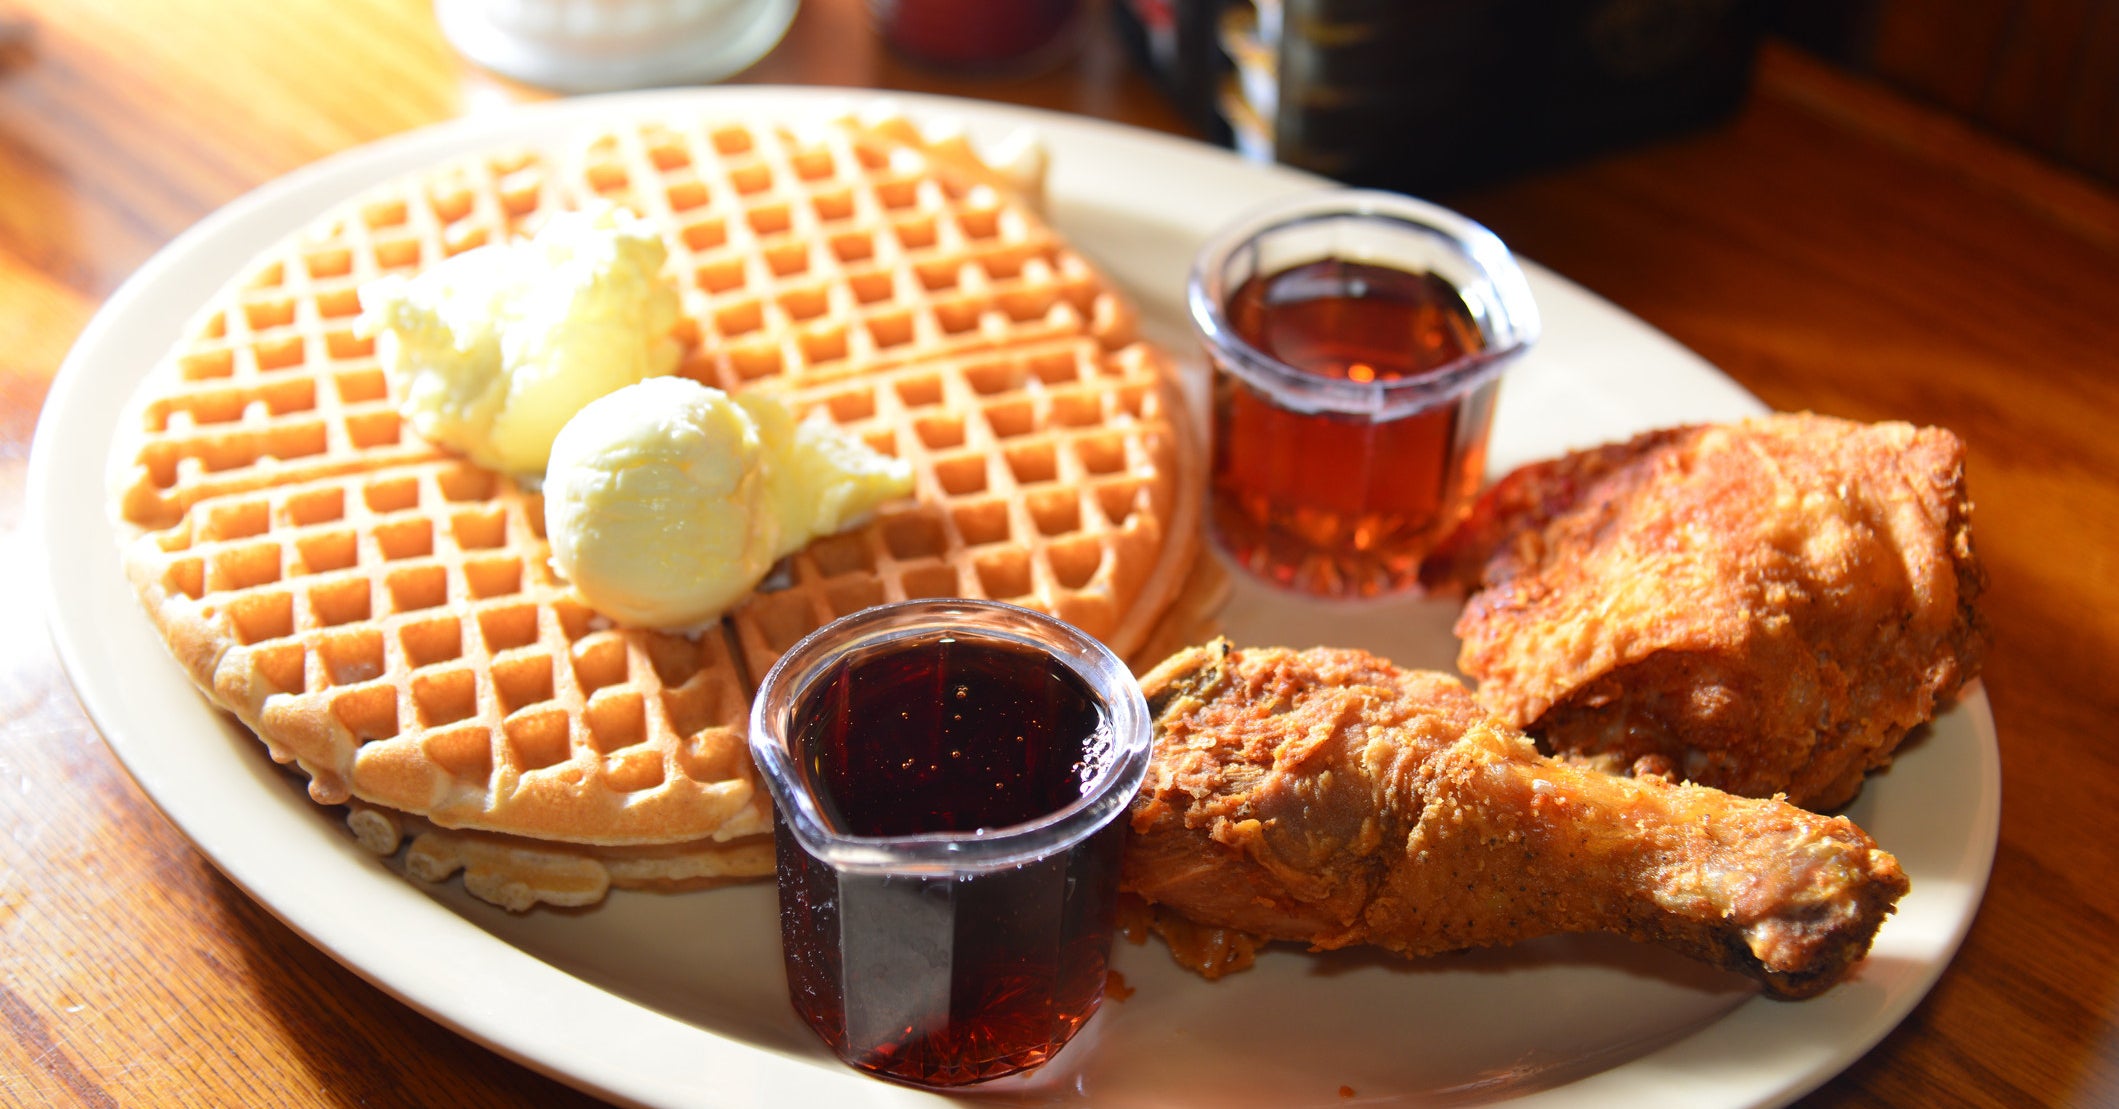 A man without a mask was refused service in a restaurant.  He supposedly came back armed and stole chicken and waffles.